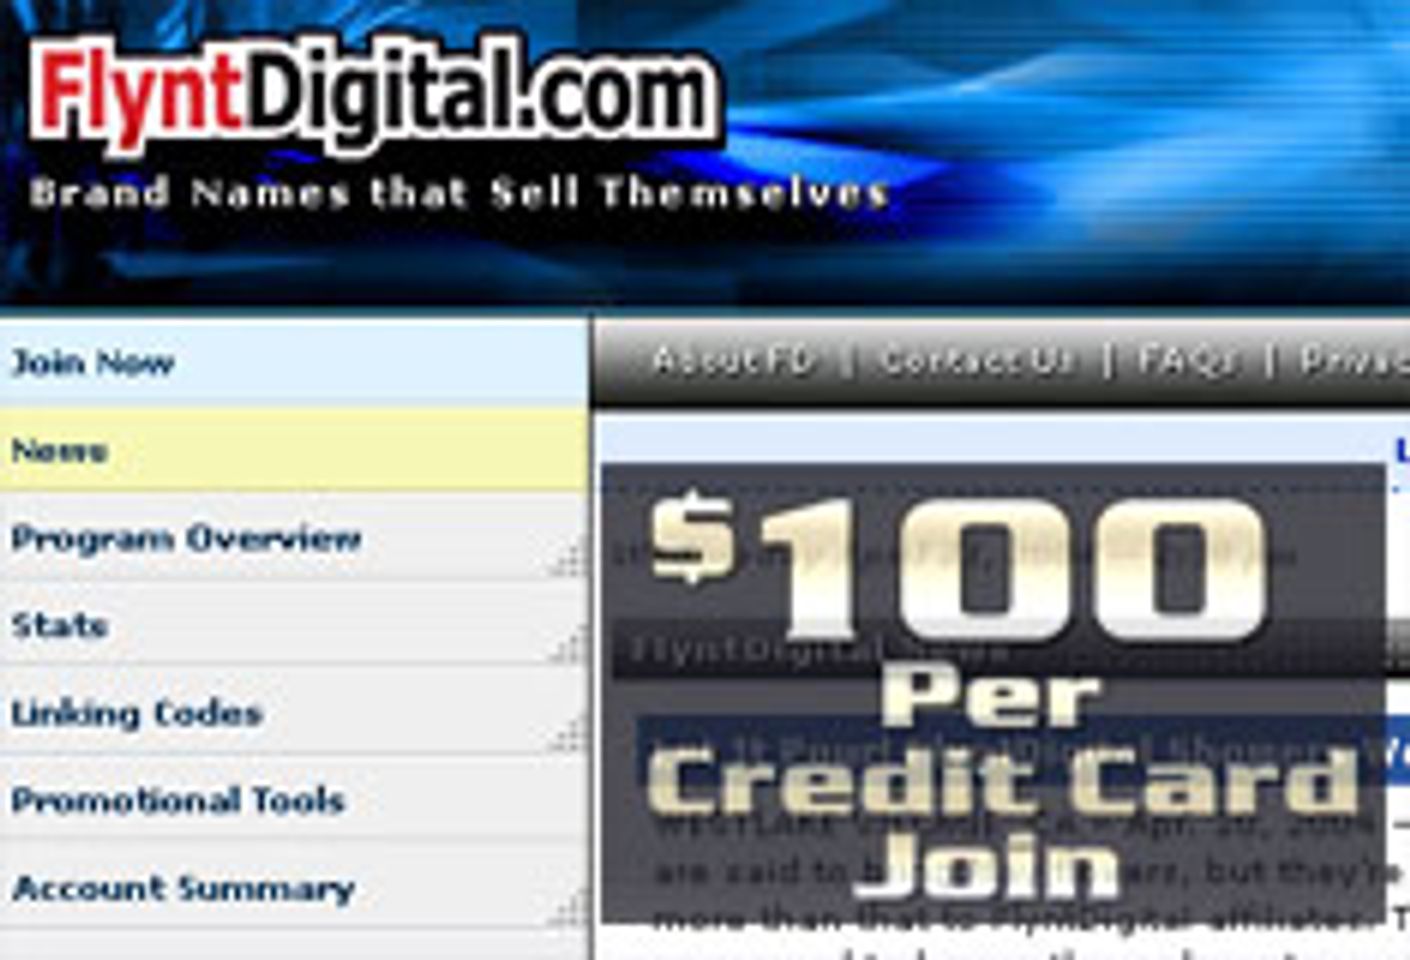 FlyntDigital Rewards Webmasters With $100 Payouts